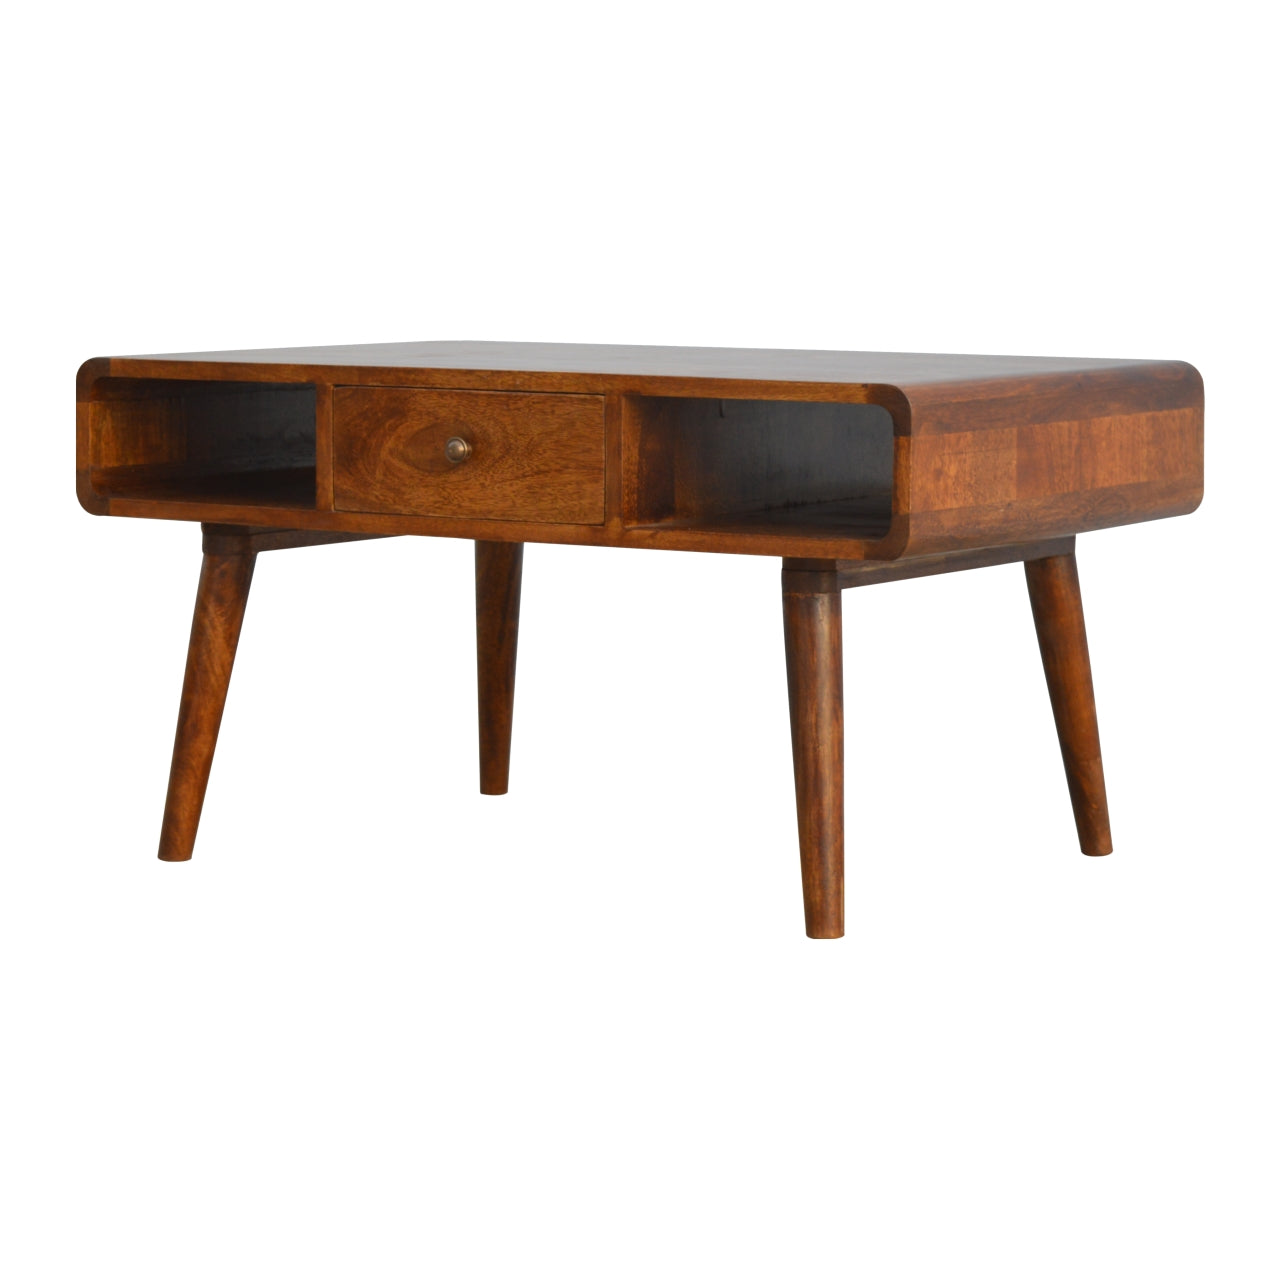 CENTURY Wood Coffee Table in deep chestnut finish with drawers and open storage slots | malletandplane.com